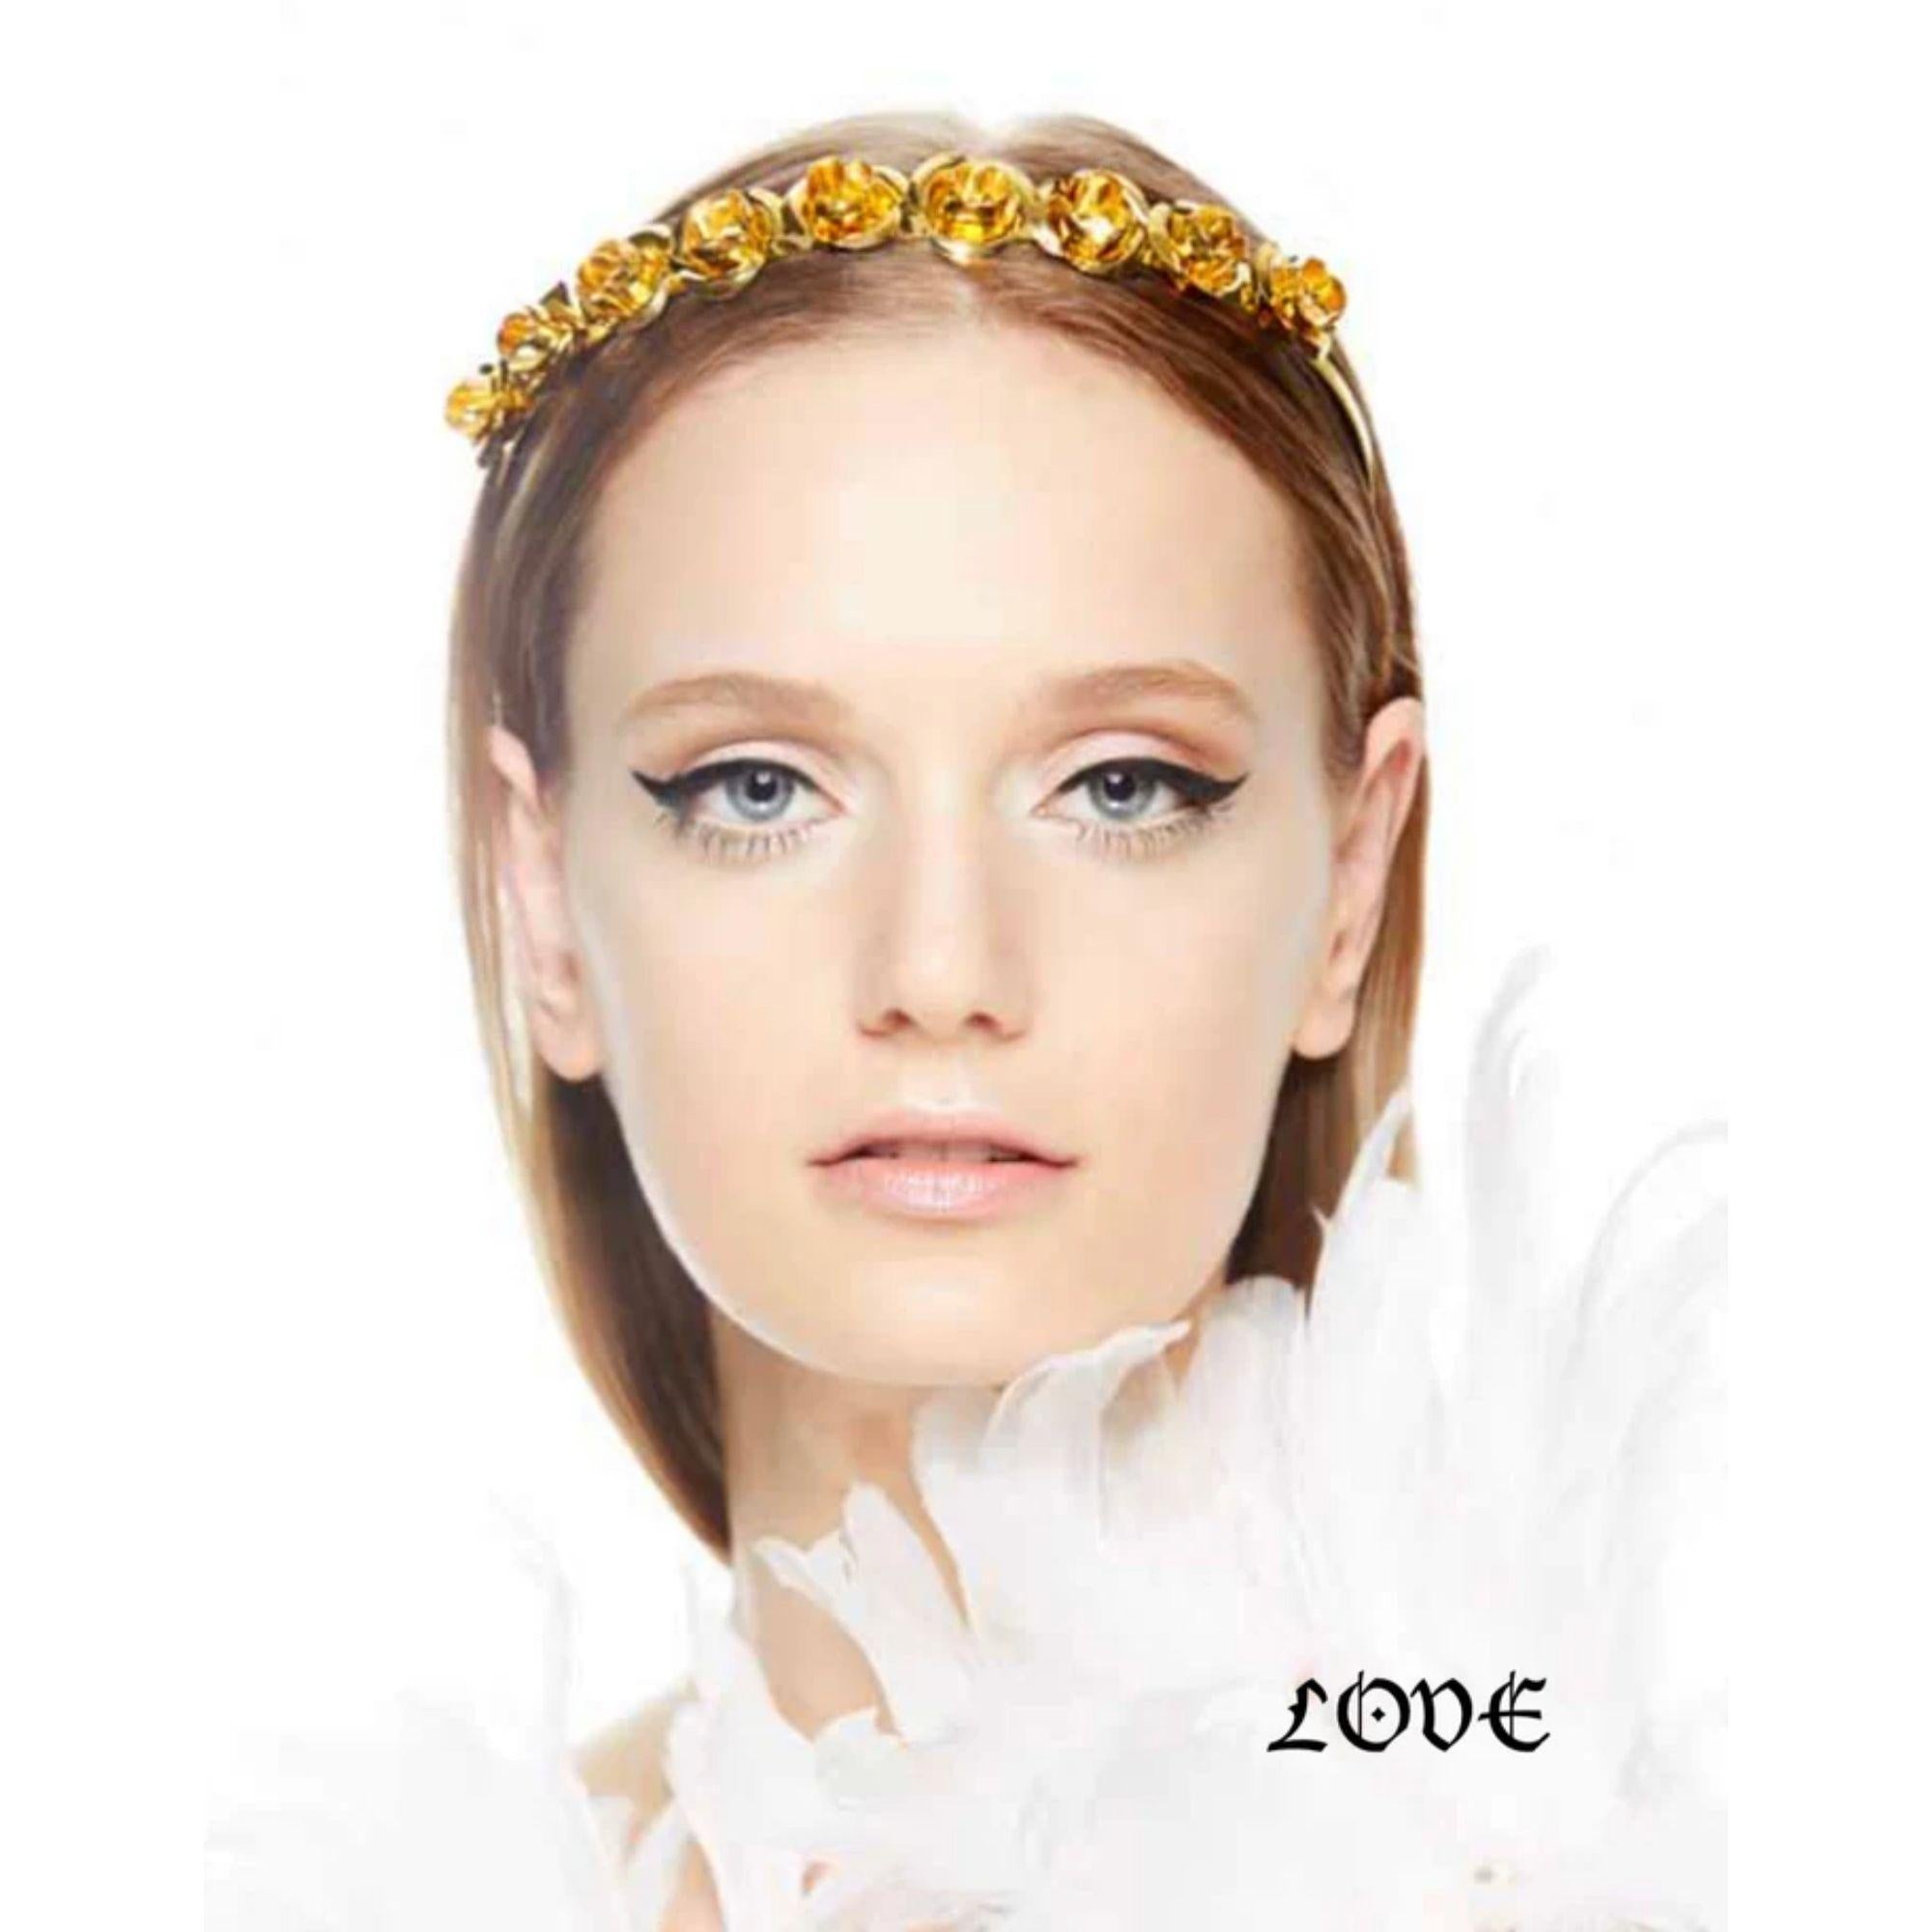 Wear this beauty for every day , a sexy dinner, club or your wedding day. Either way it will be unforgettable! Handmade by encrusting a headband with 9 mini roses then plated in the gold finish of your choice. Check out the matching Lana rose